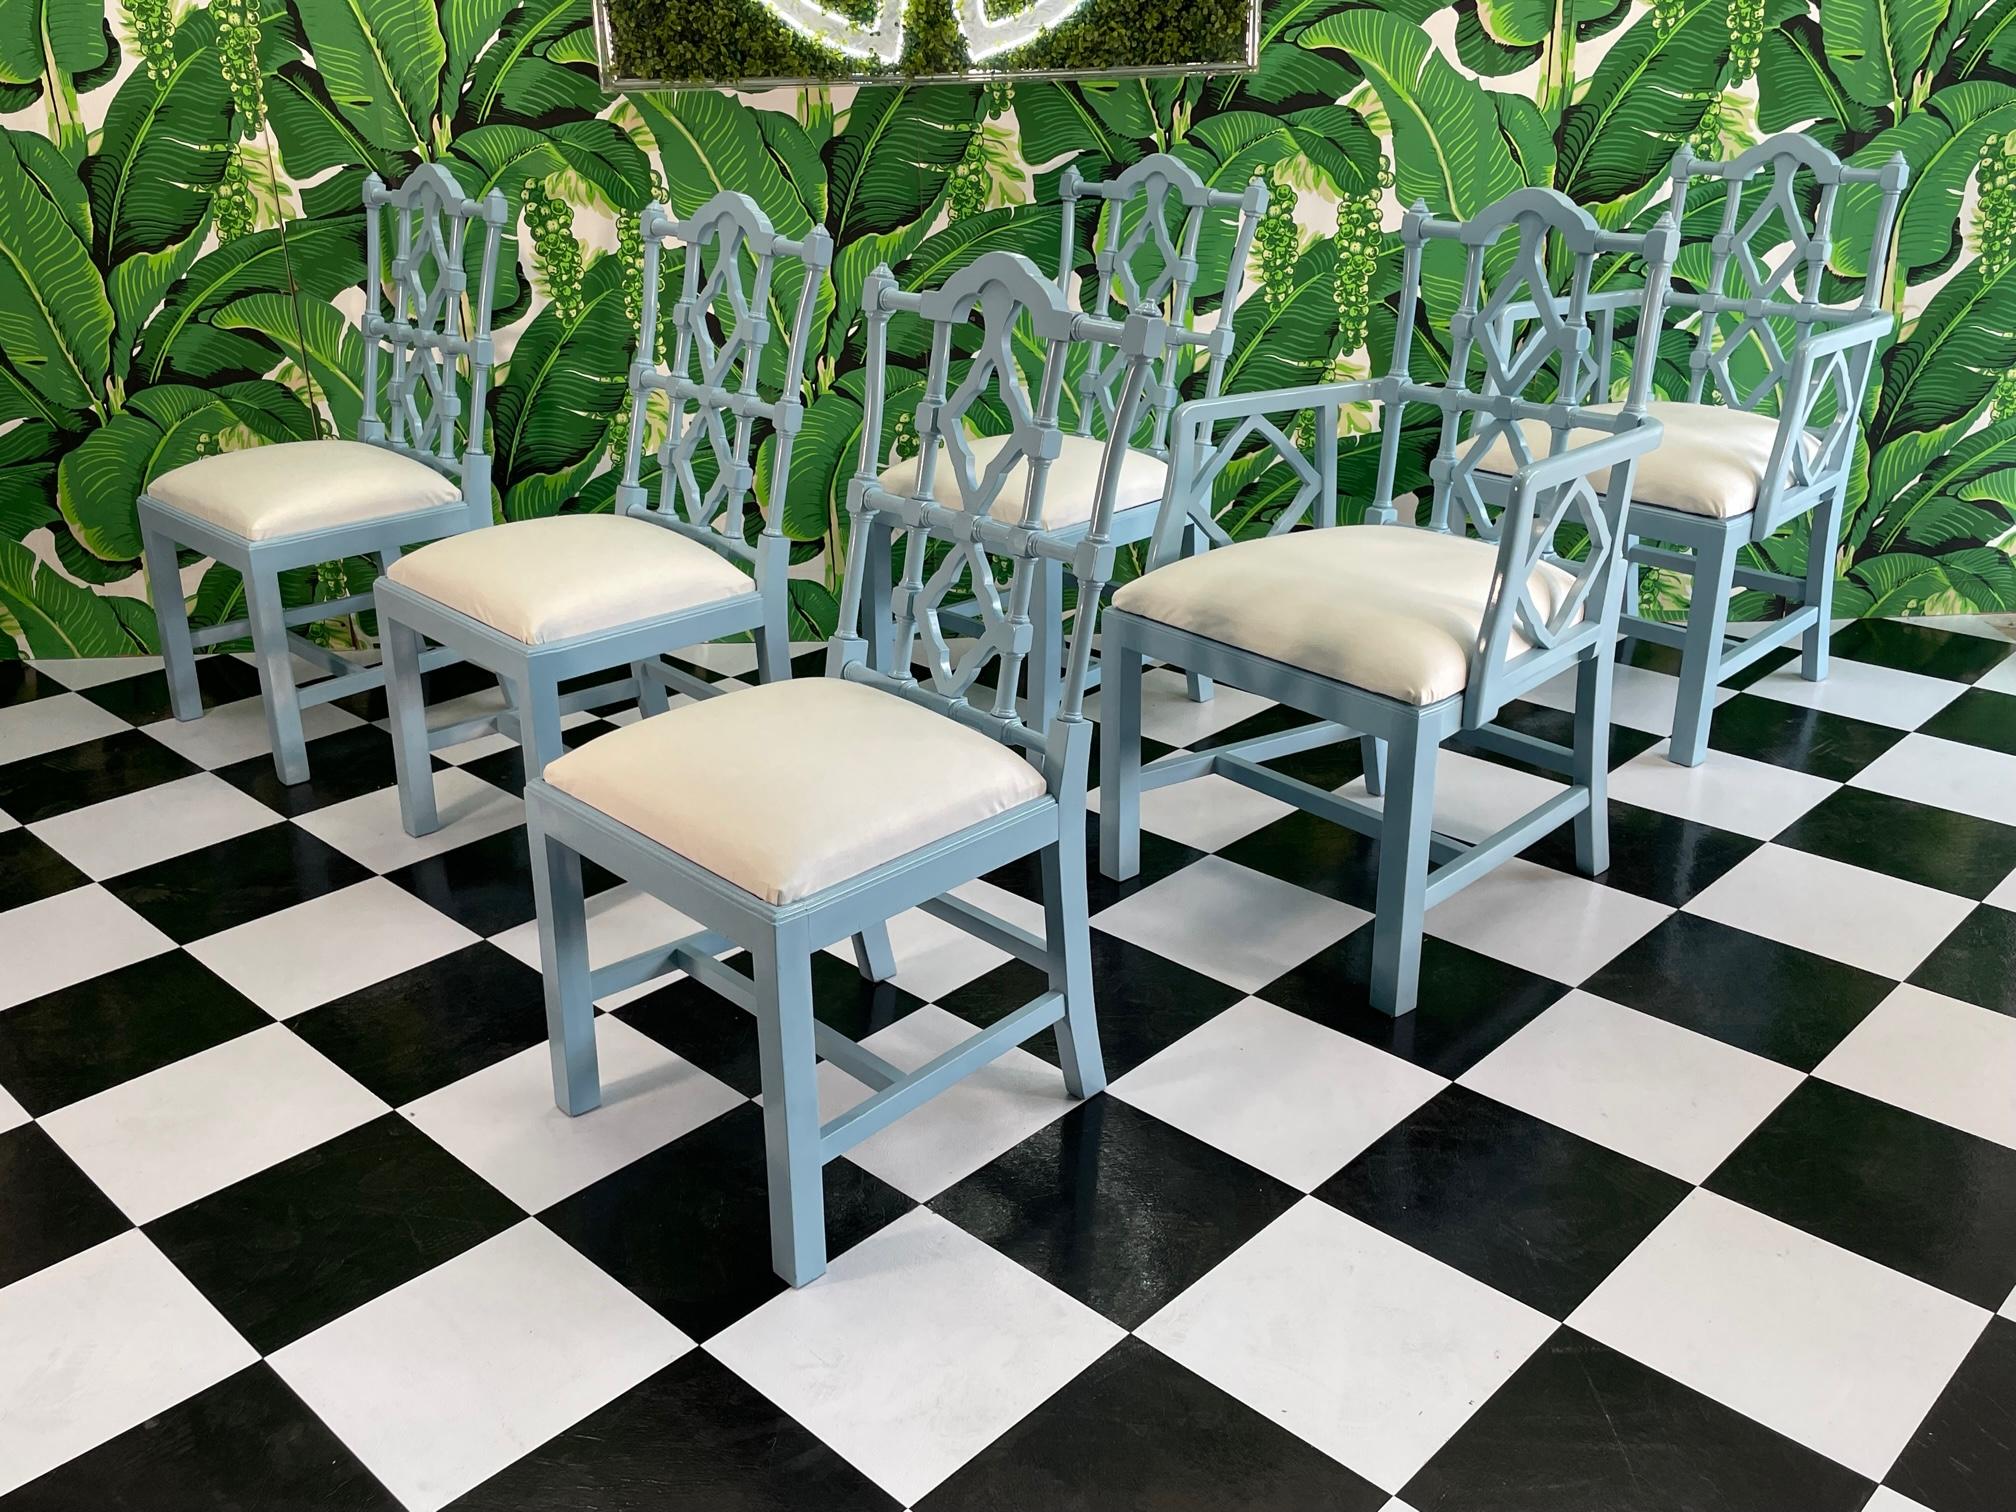 Set of 6 solid wood chairs feature interesting fretwork backs, splayed rear legs, and a high gloss blue finish. Newly upholstered in muslin, ready for your fabric. Solid and sturdy, good condition with minor imperfections consistent with age. See